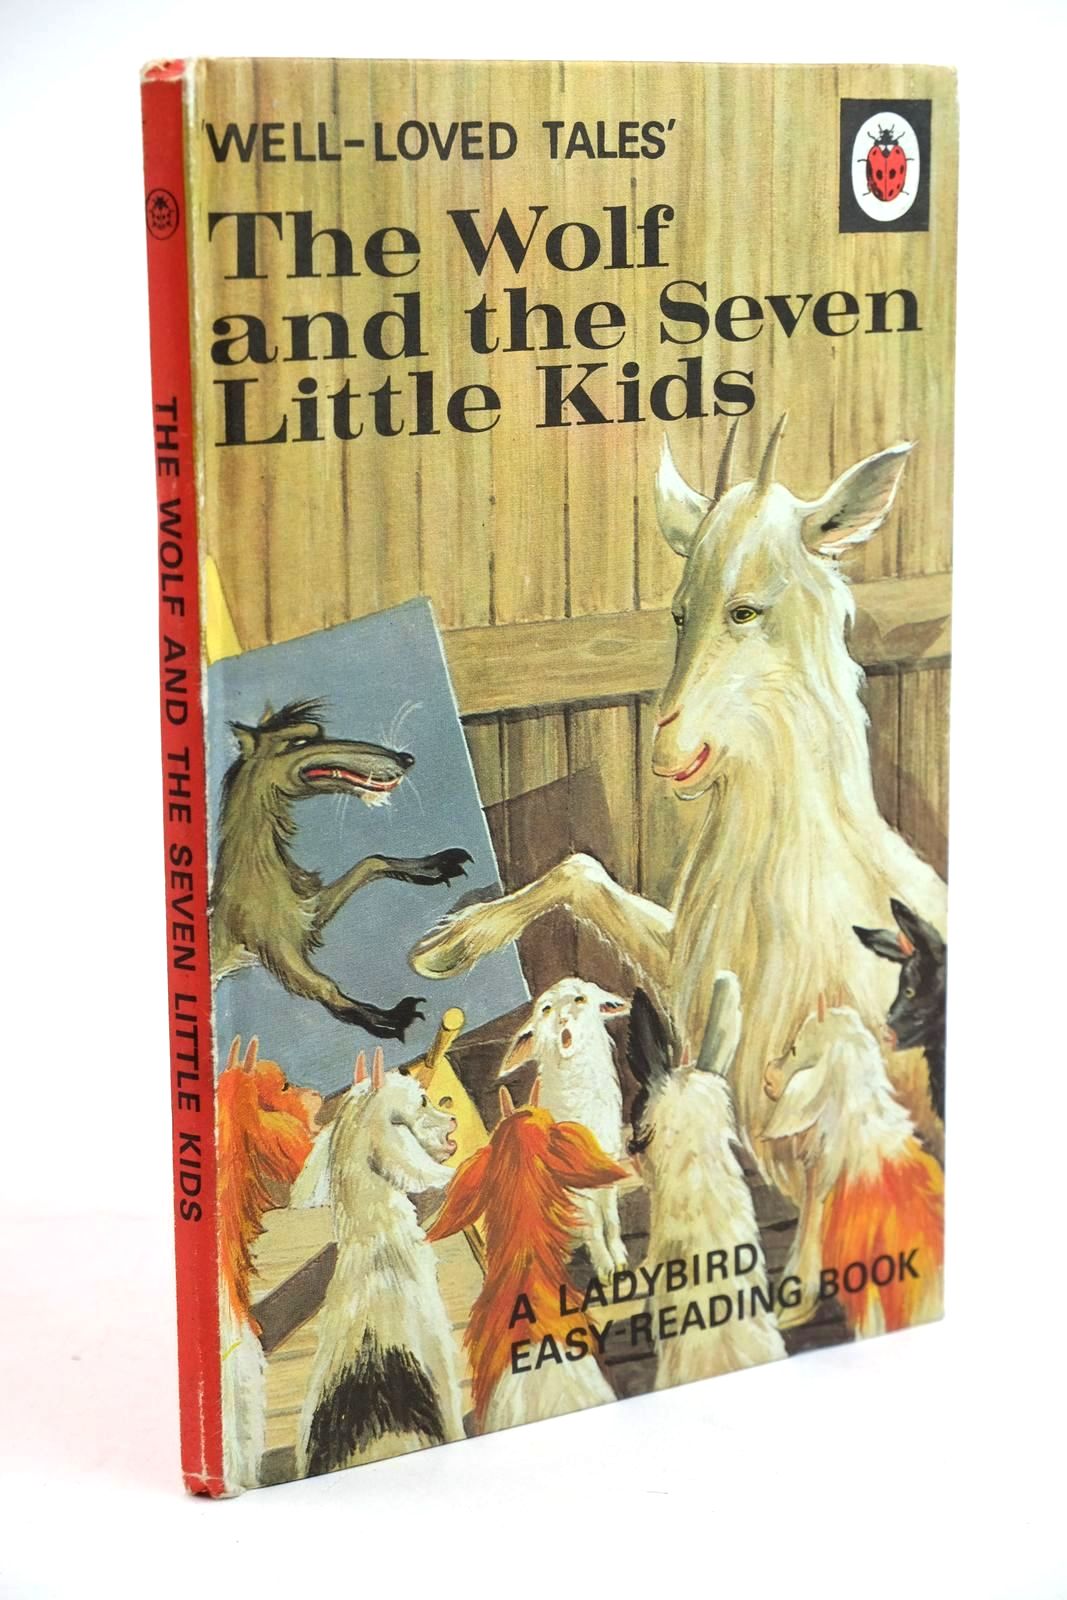 Photo of THE WOLF AND THE SEVEN LITTLE KIDS written by Southgate, Vera illustrated by Lumley, Robert published by Wills & Hepworth Ltd. (STOCK CODE: 1321464)  for sale by Stella & Rose's Books